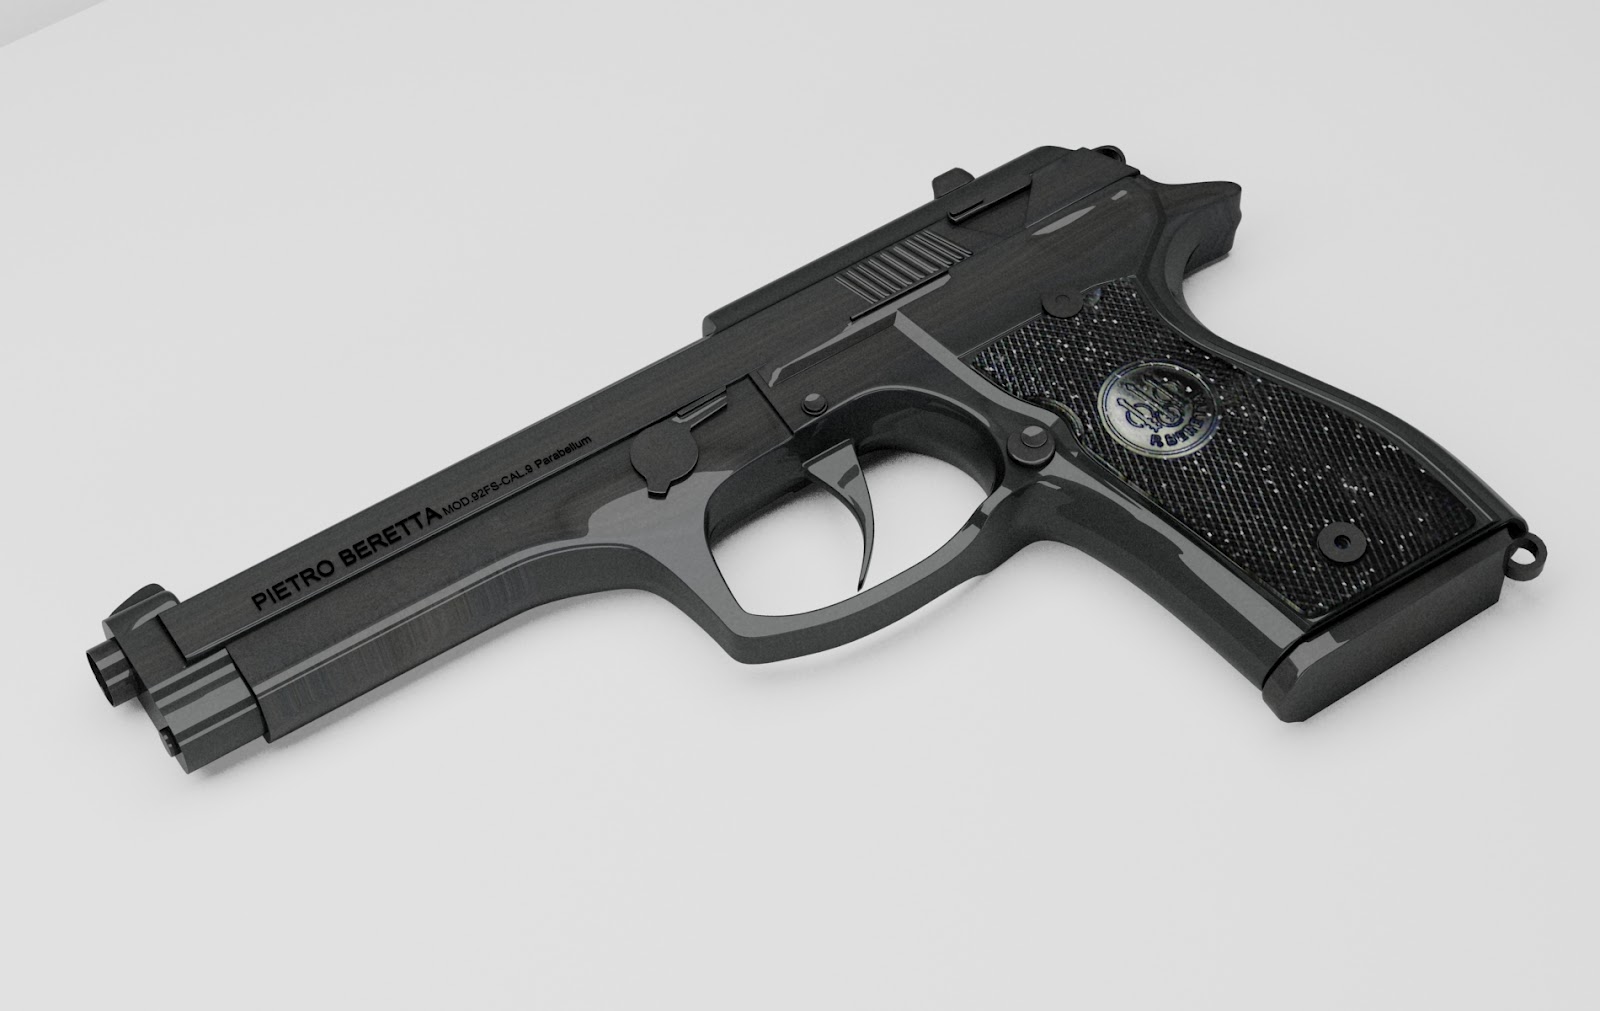 This is a beretta 9mm, I like action movies, and I thought that creating a ...